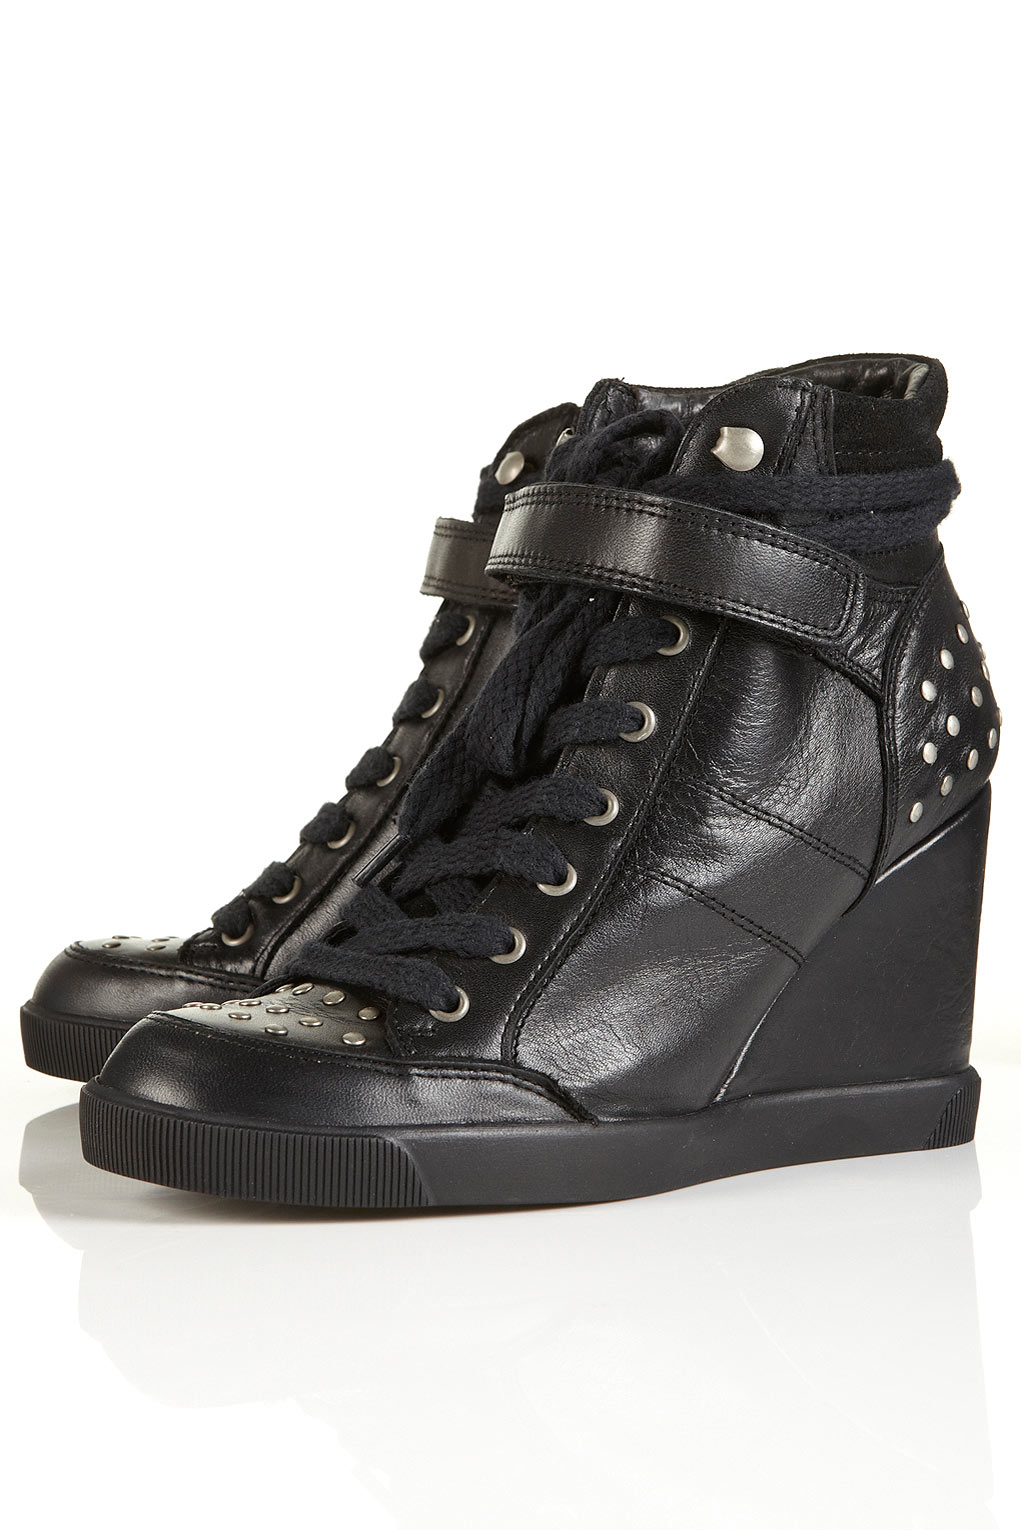 My Styleadvisor: Dress For Less: The Hi-Top Wedge Sneaker à la Isabel ...